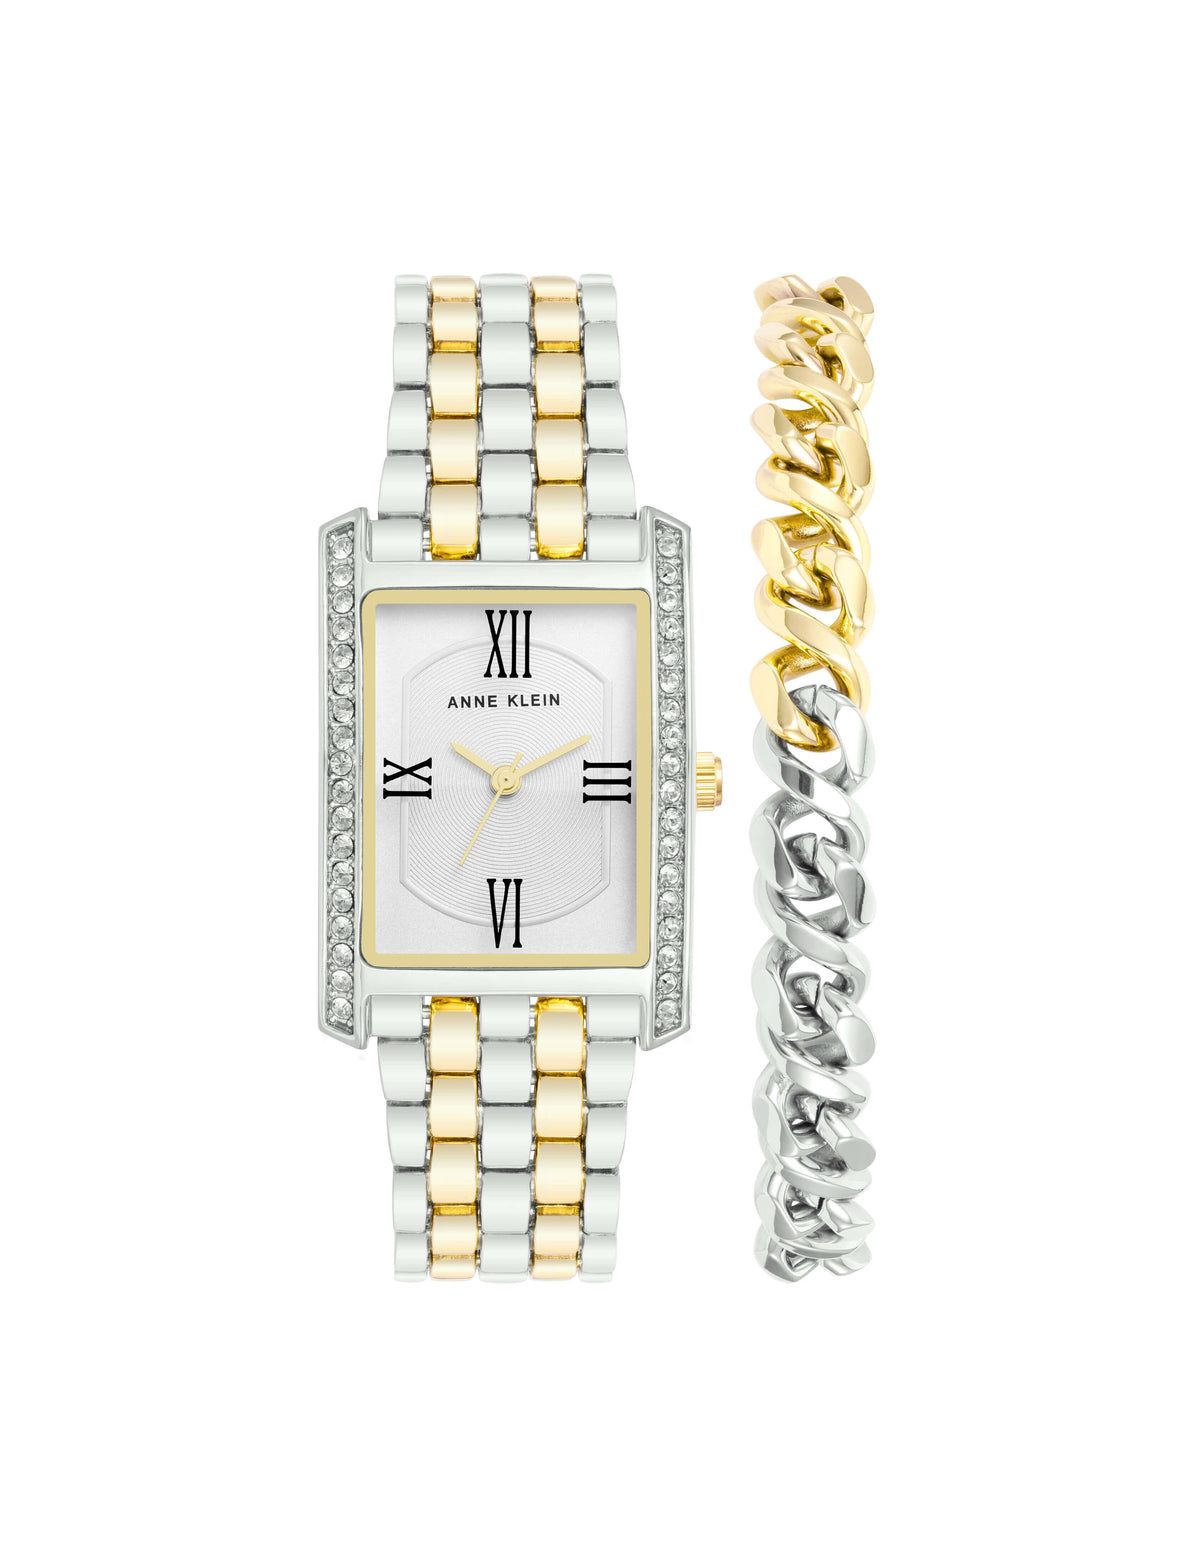 Anne Klein Silver-Tone/ Gold-Tone Rectangular Crystal Accented Watch Set with Chain Bracelet